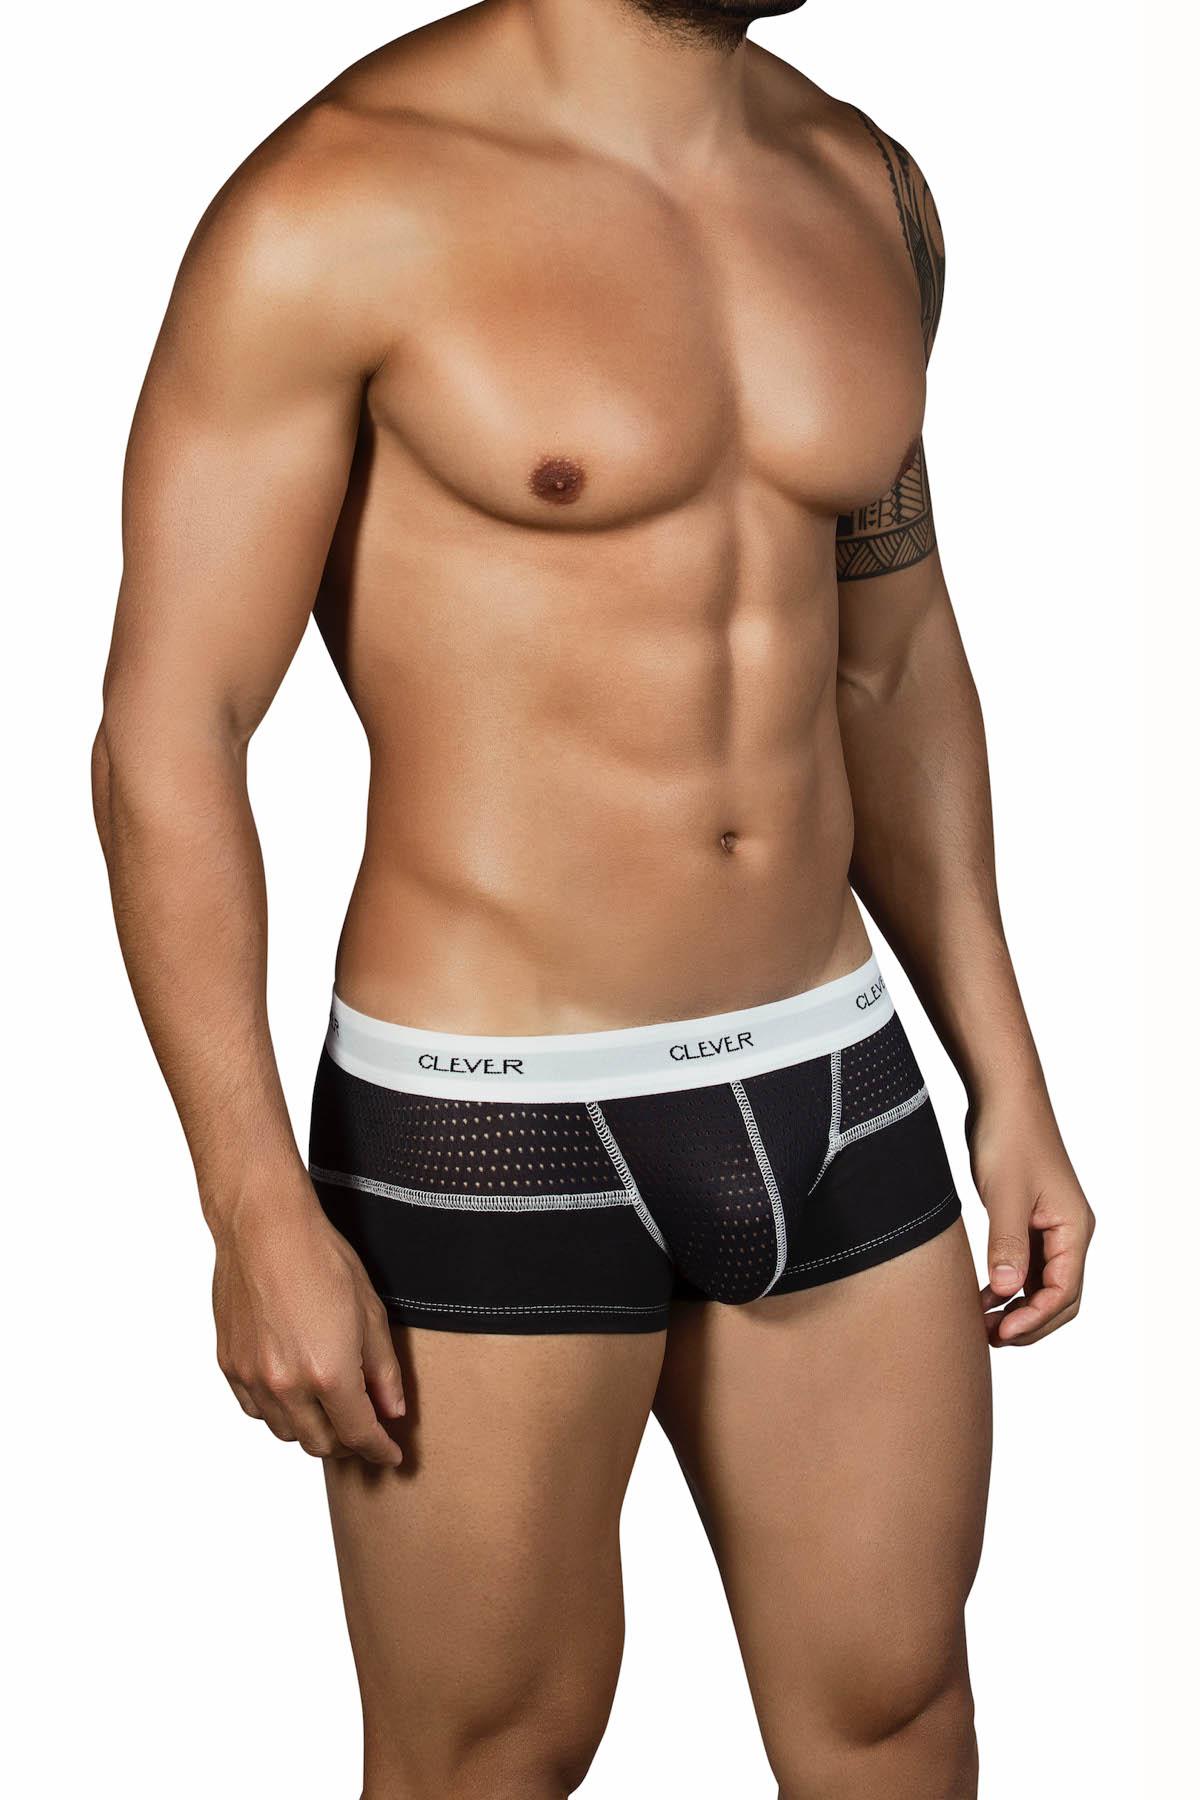 Clever Black Sweetness Latin Boxer Brief